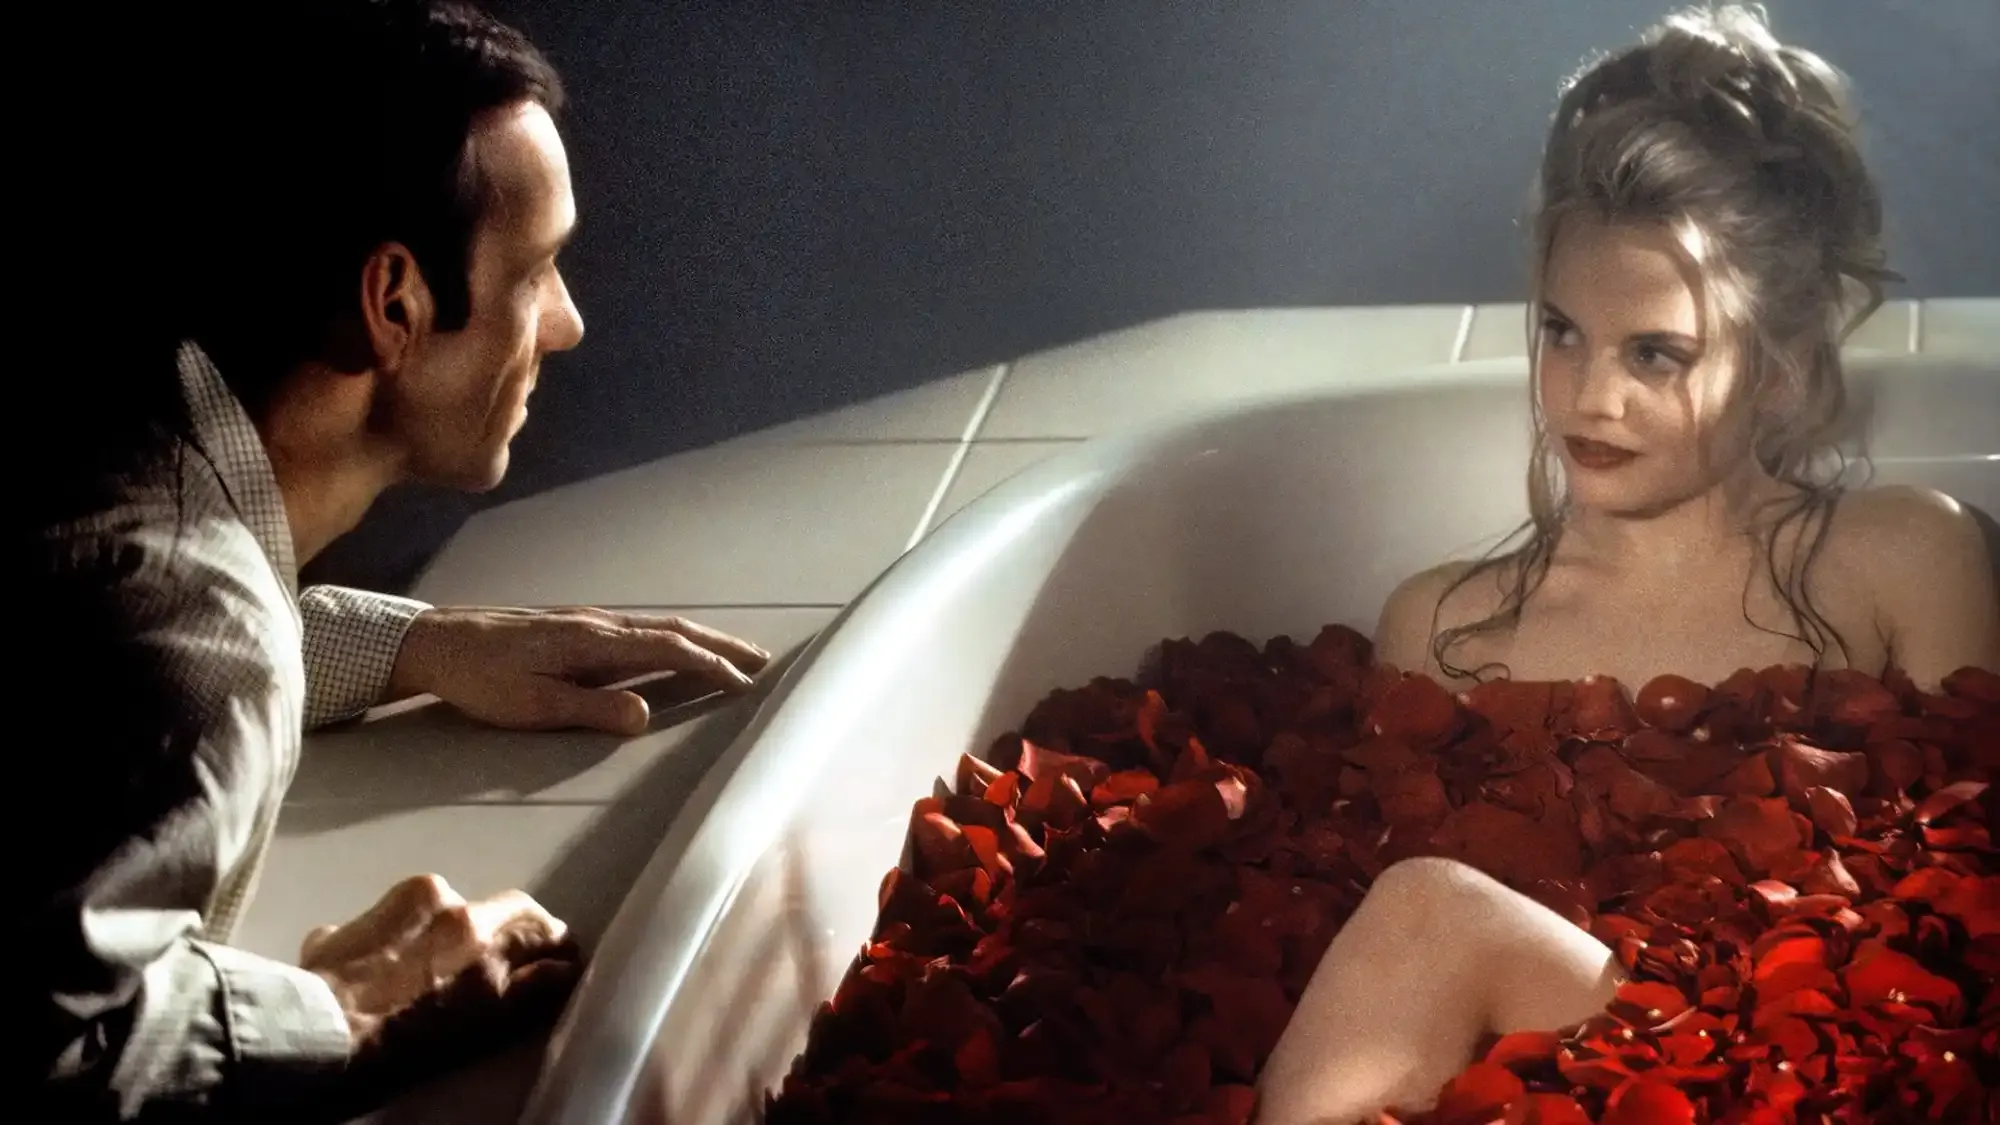 American Beauty movie review